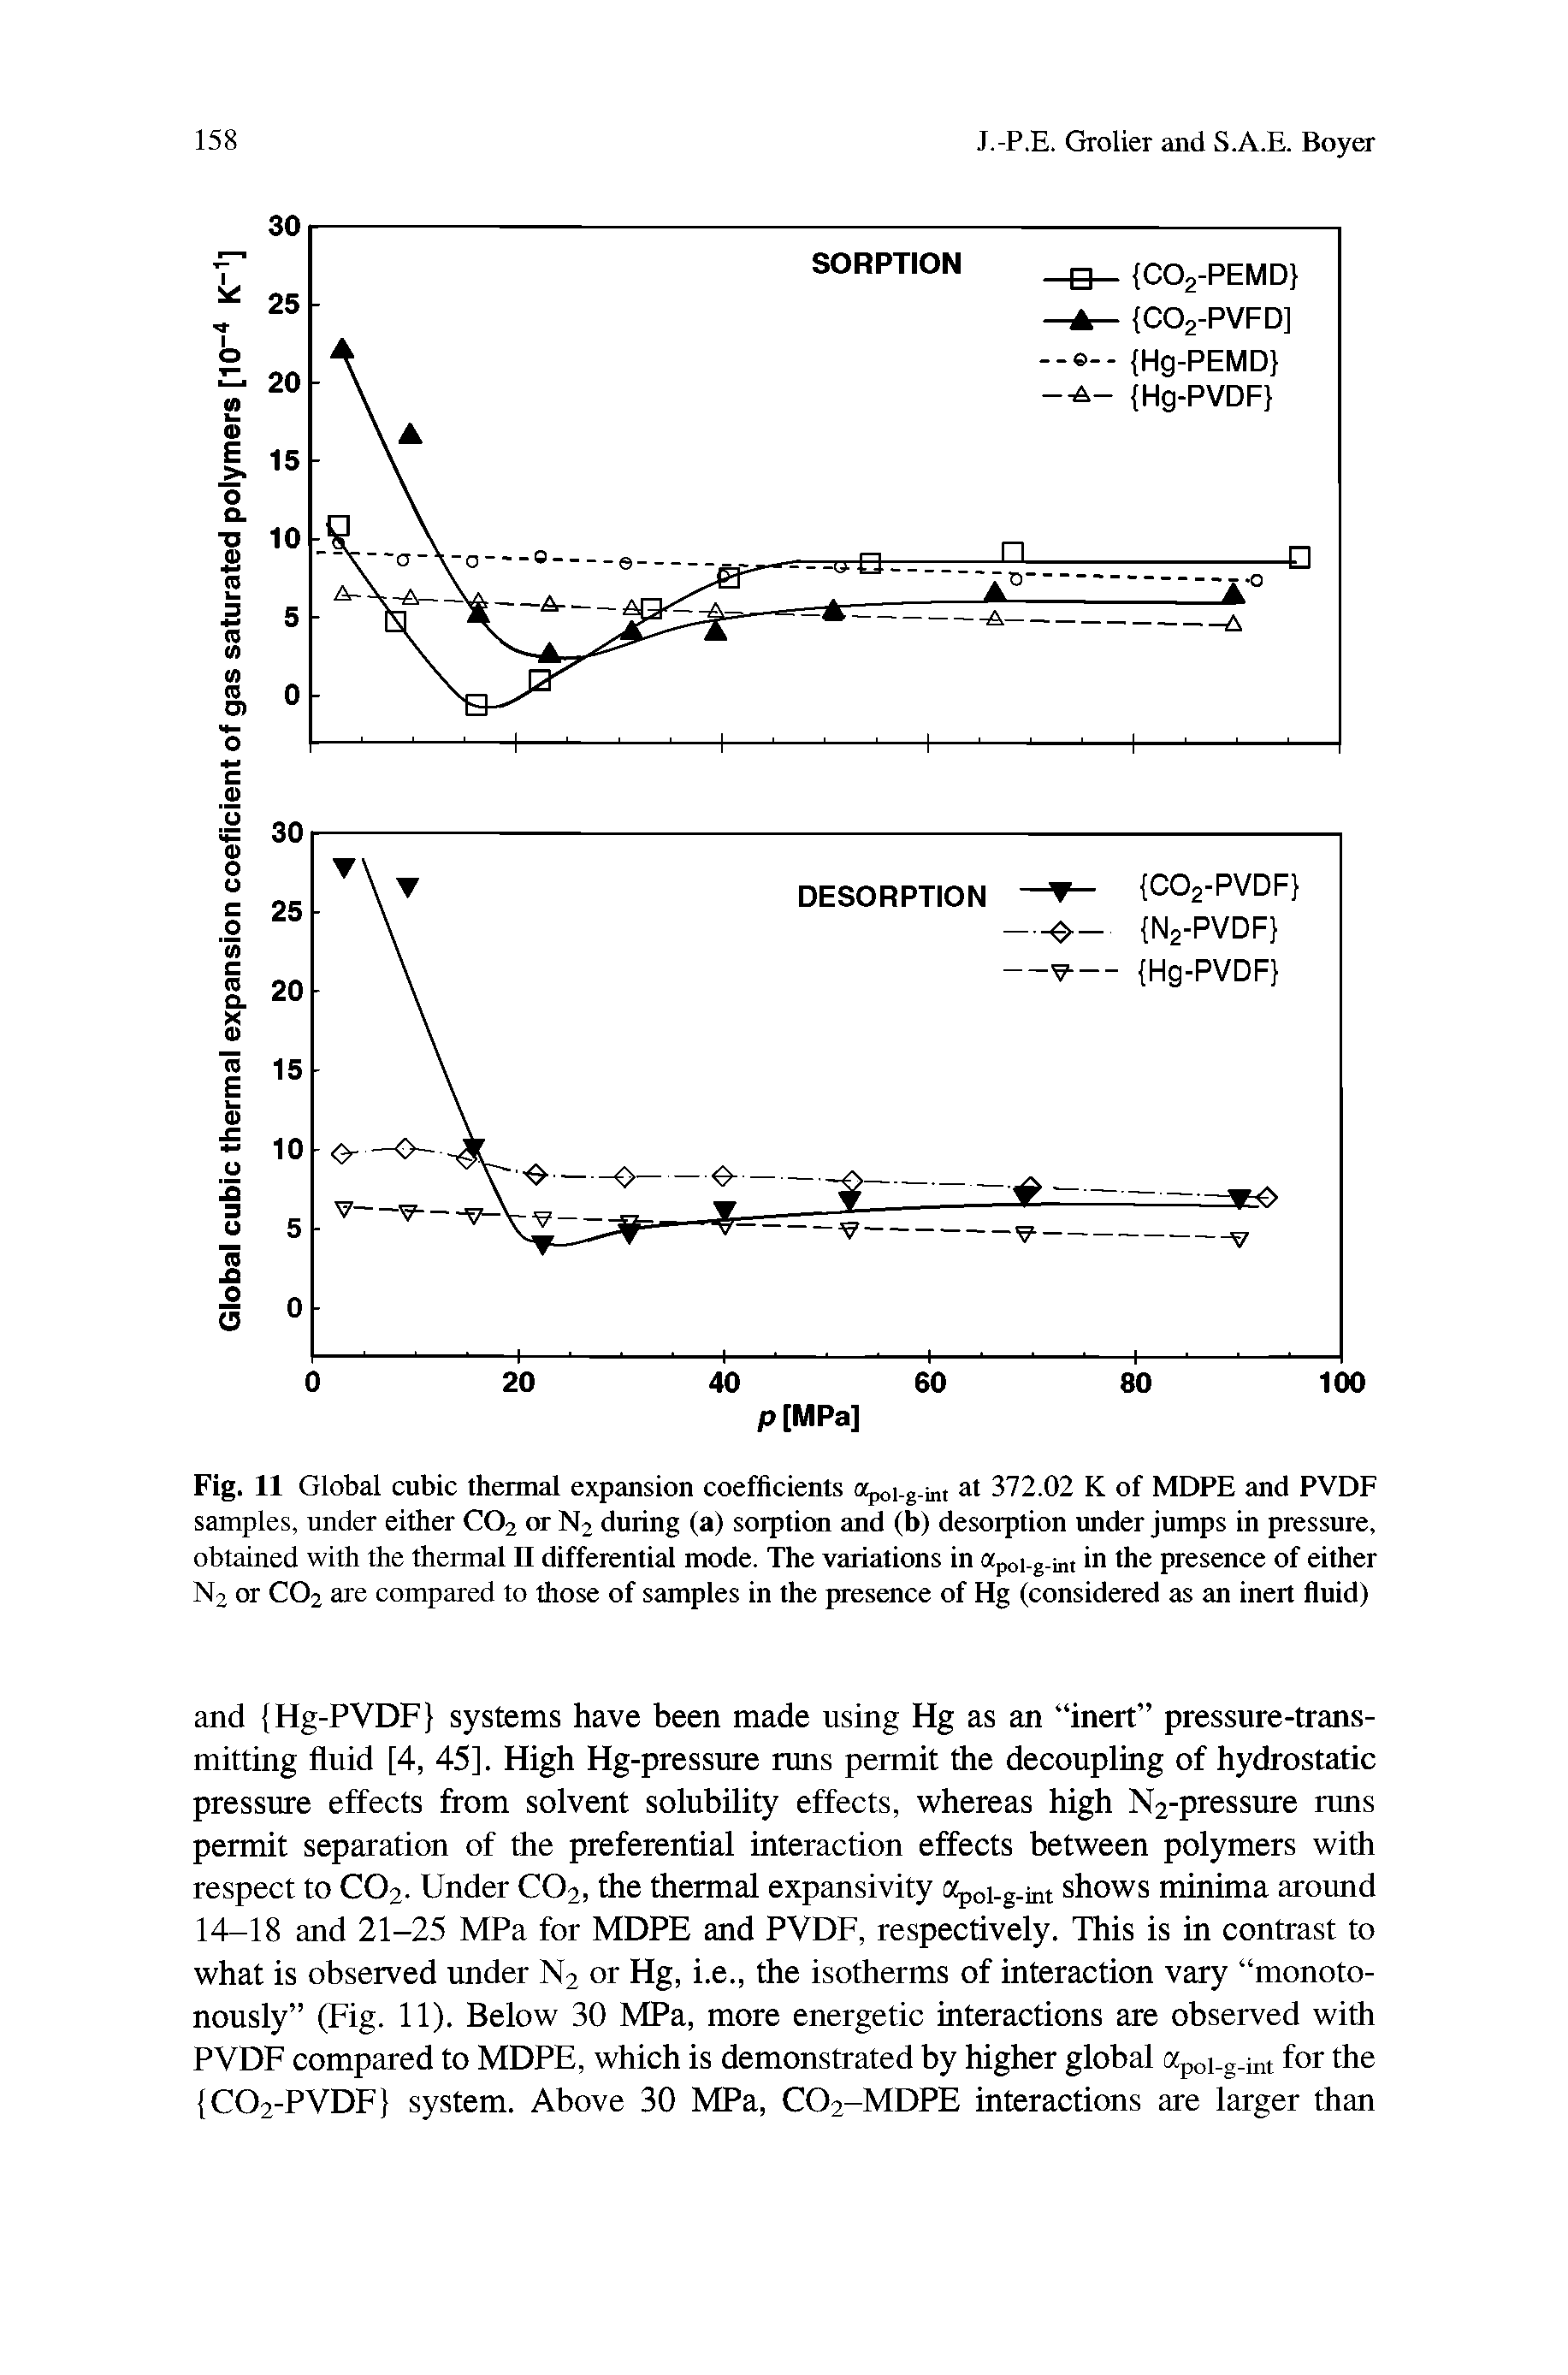 Fig. 11 Global cubic thennal expansion coefficients otpoi.g.int at 372.02 K of MDPE and PVDF samples, under either CO2 or N2 during (a) sorption and (b) desorption under jumps in pressure, obtained with the thermal n differential mode. The variations in apoi-g-int in the presence of either N2 or CO2 are compared to those of samples in the presence of Hg (considered as an inert fluid)...